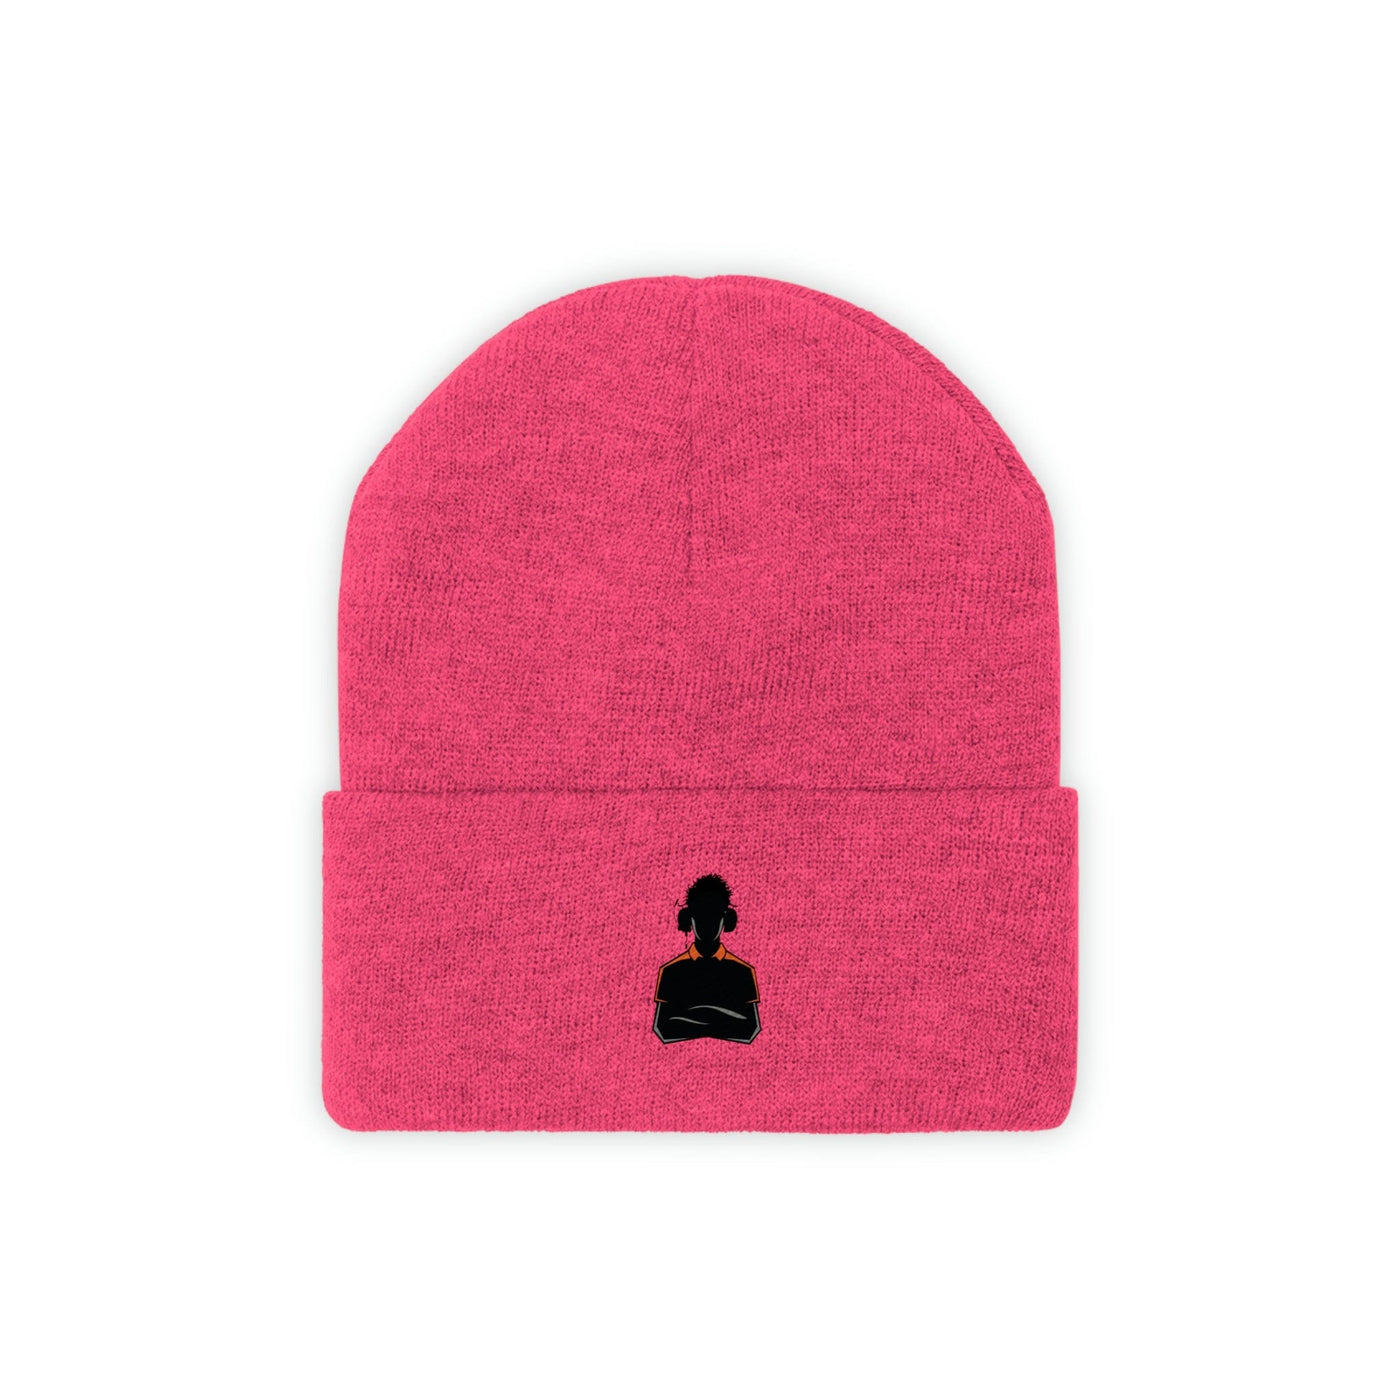 The Player One Neon Pink Knitted Beanie Hat